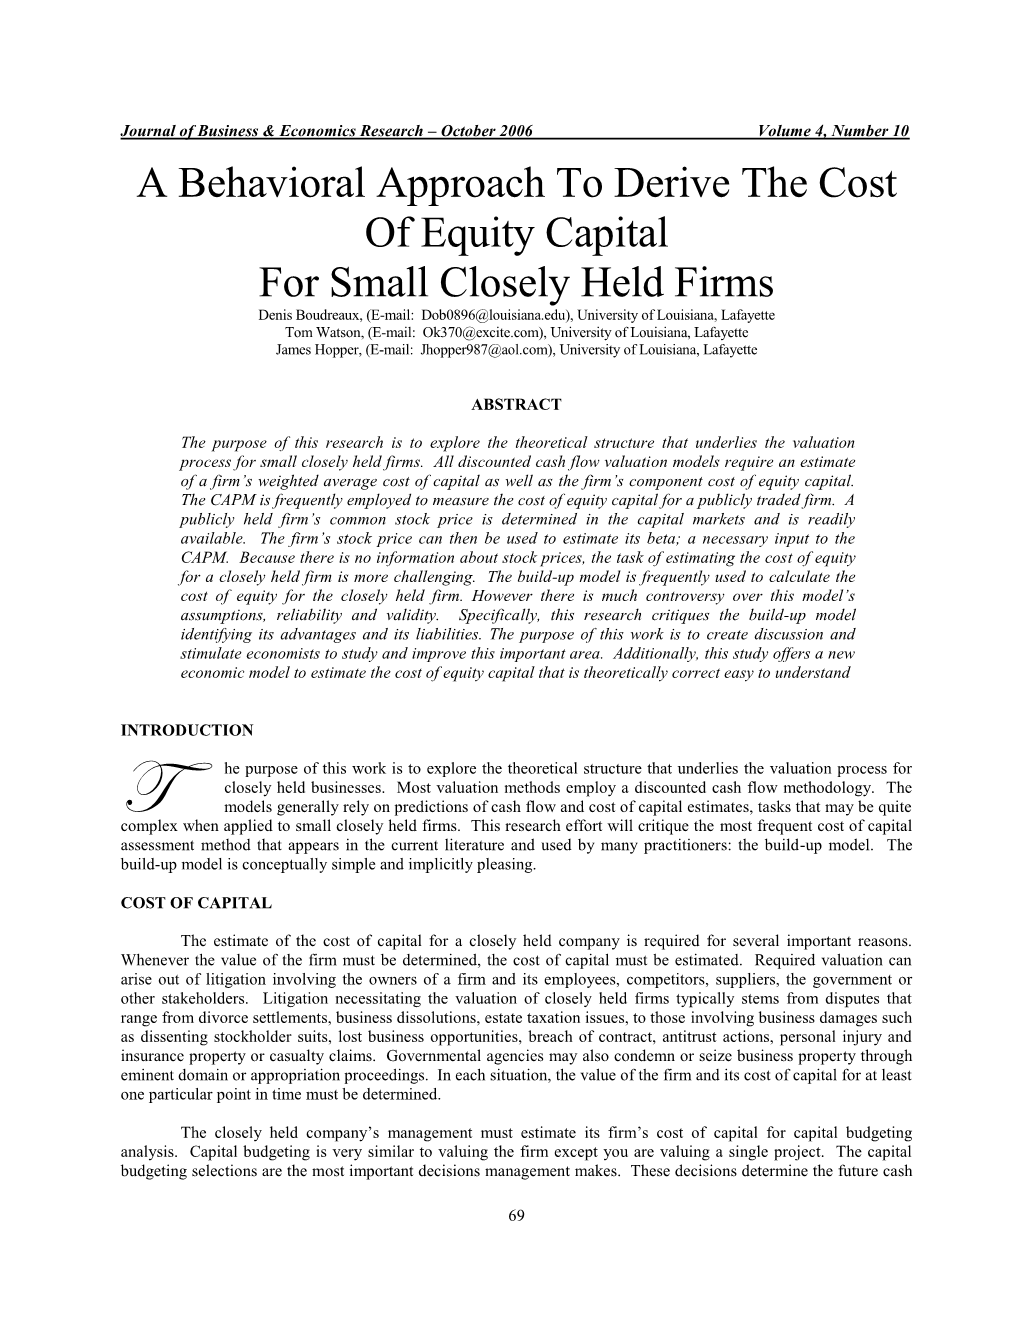 A New Framework to Derive the Cost of Equity Capital